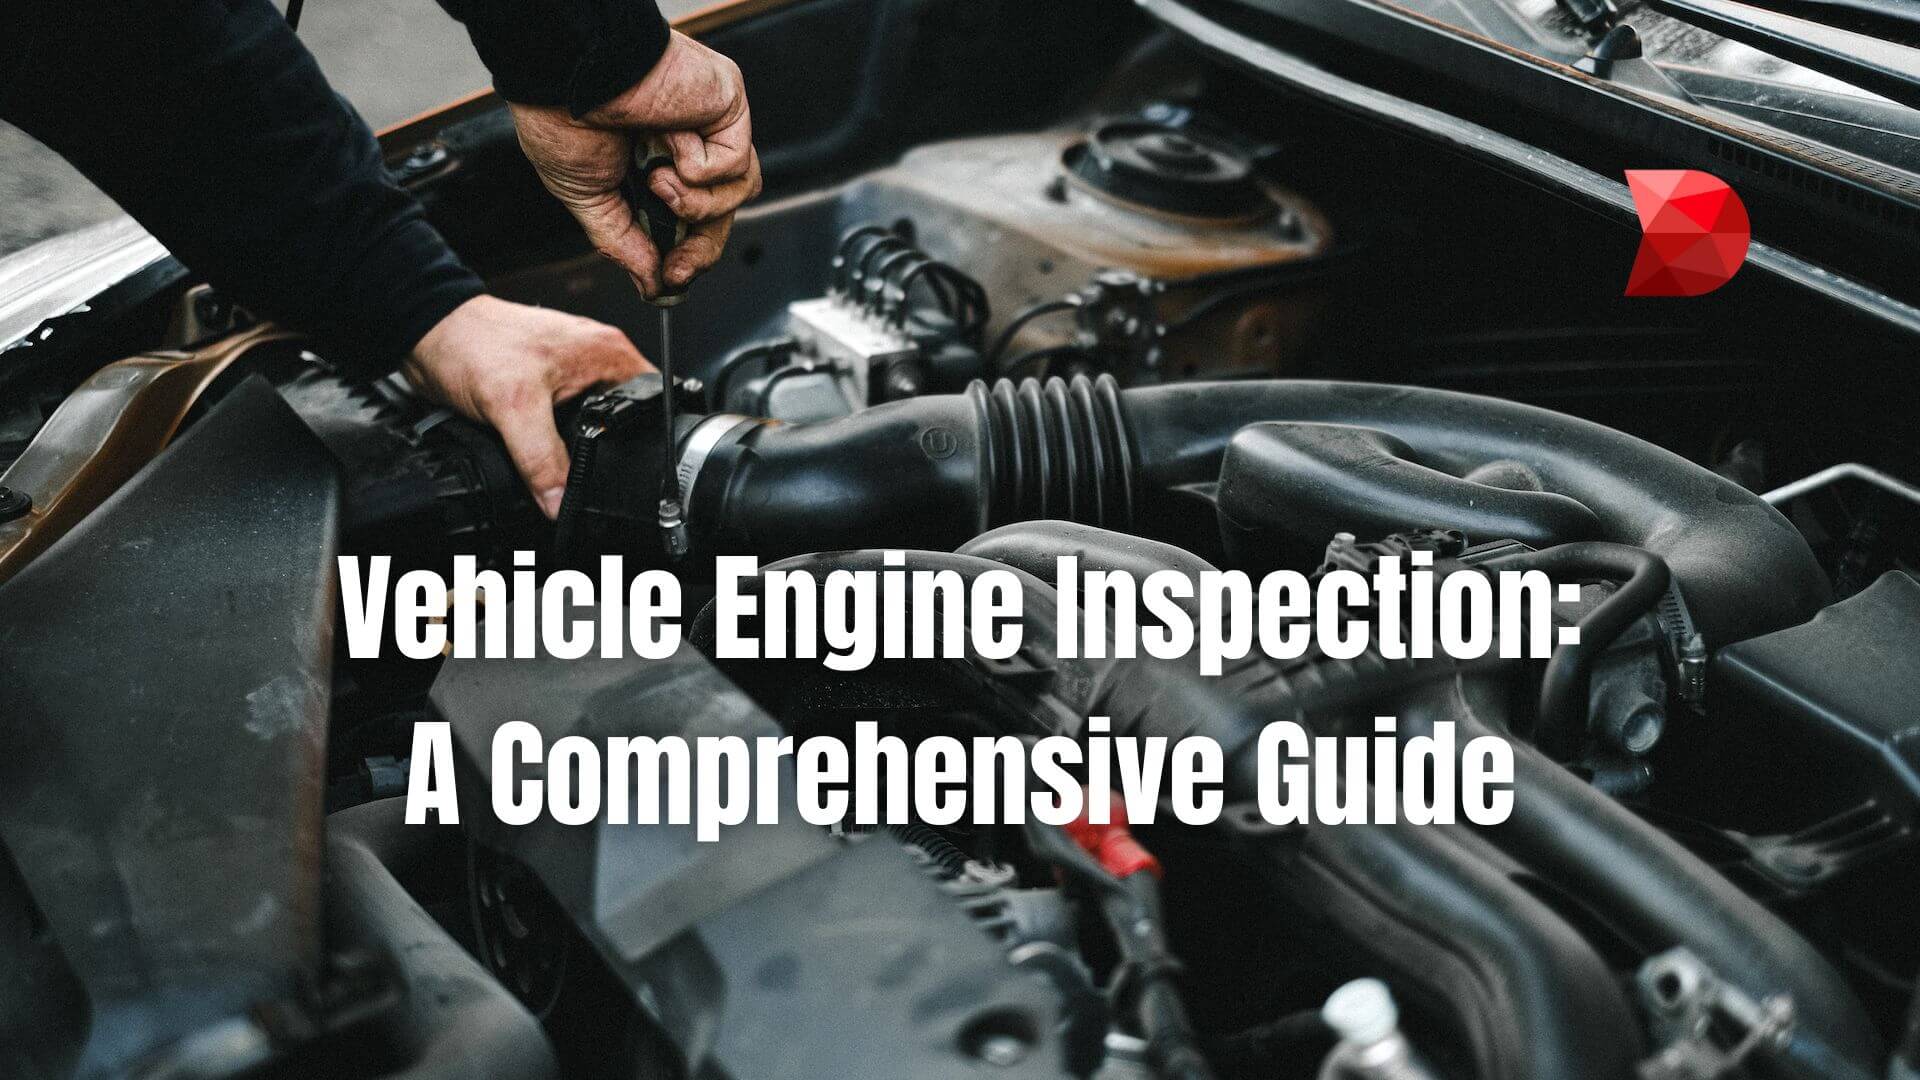 Complete an engine inspection to ensure your engine is in good working order and running optimally. Here's a detailed information.